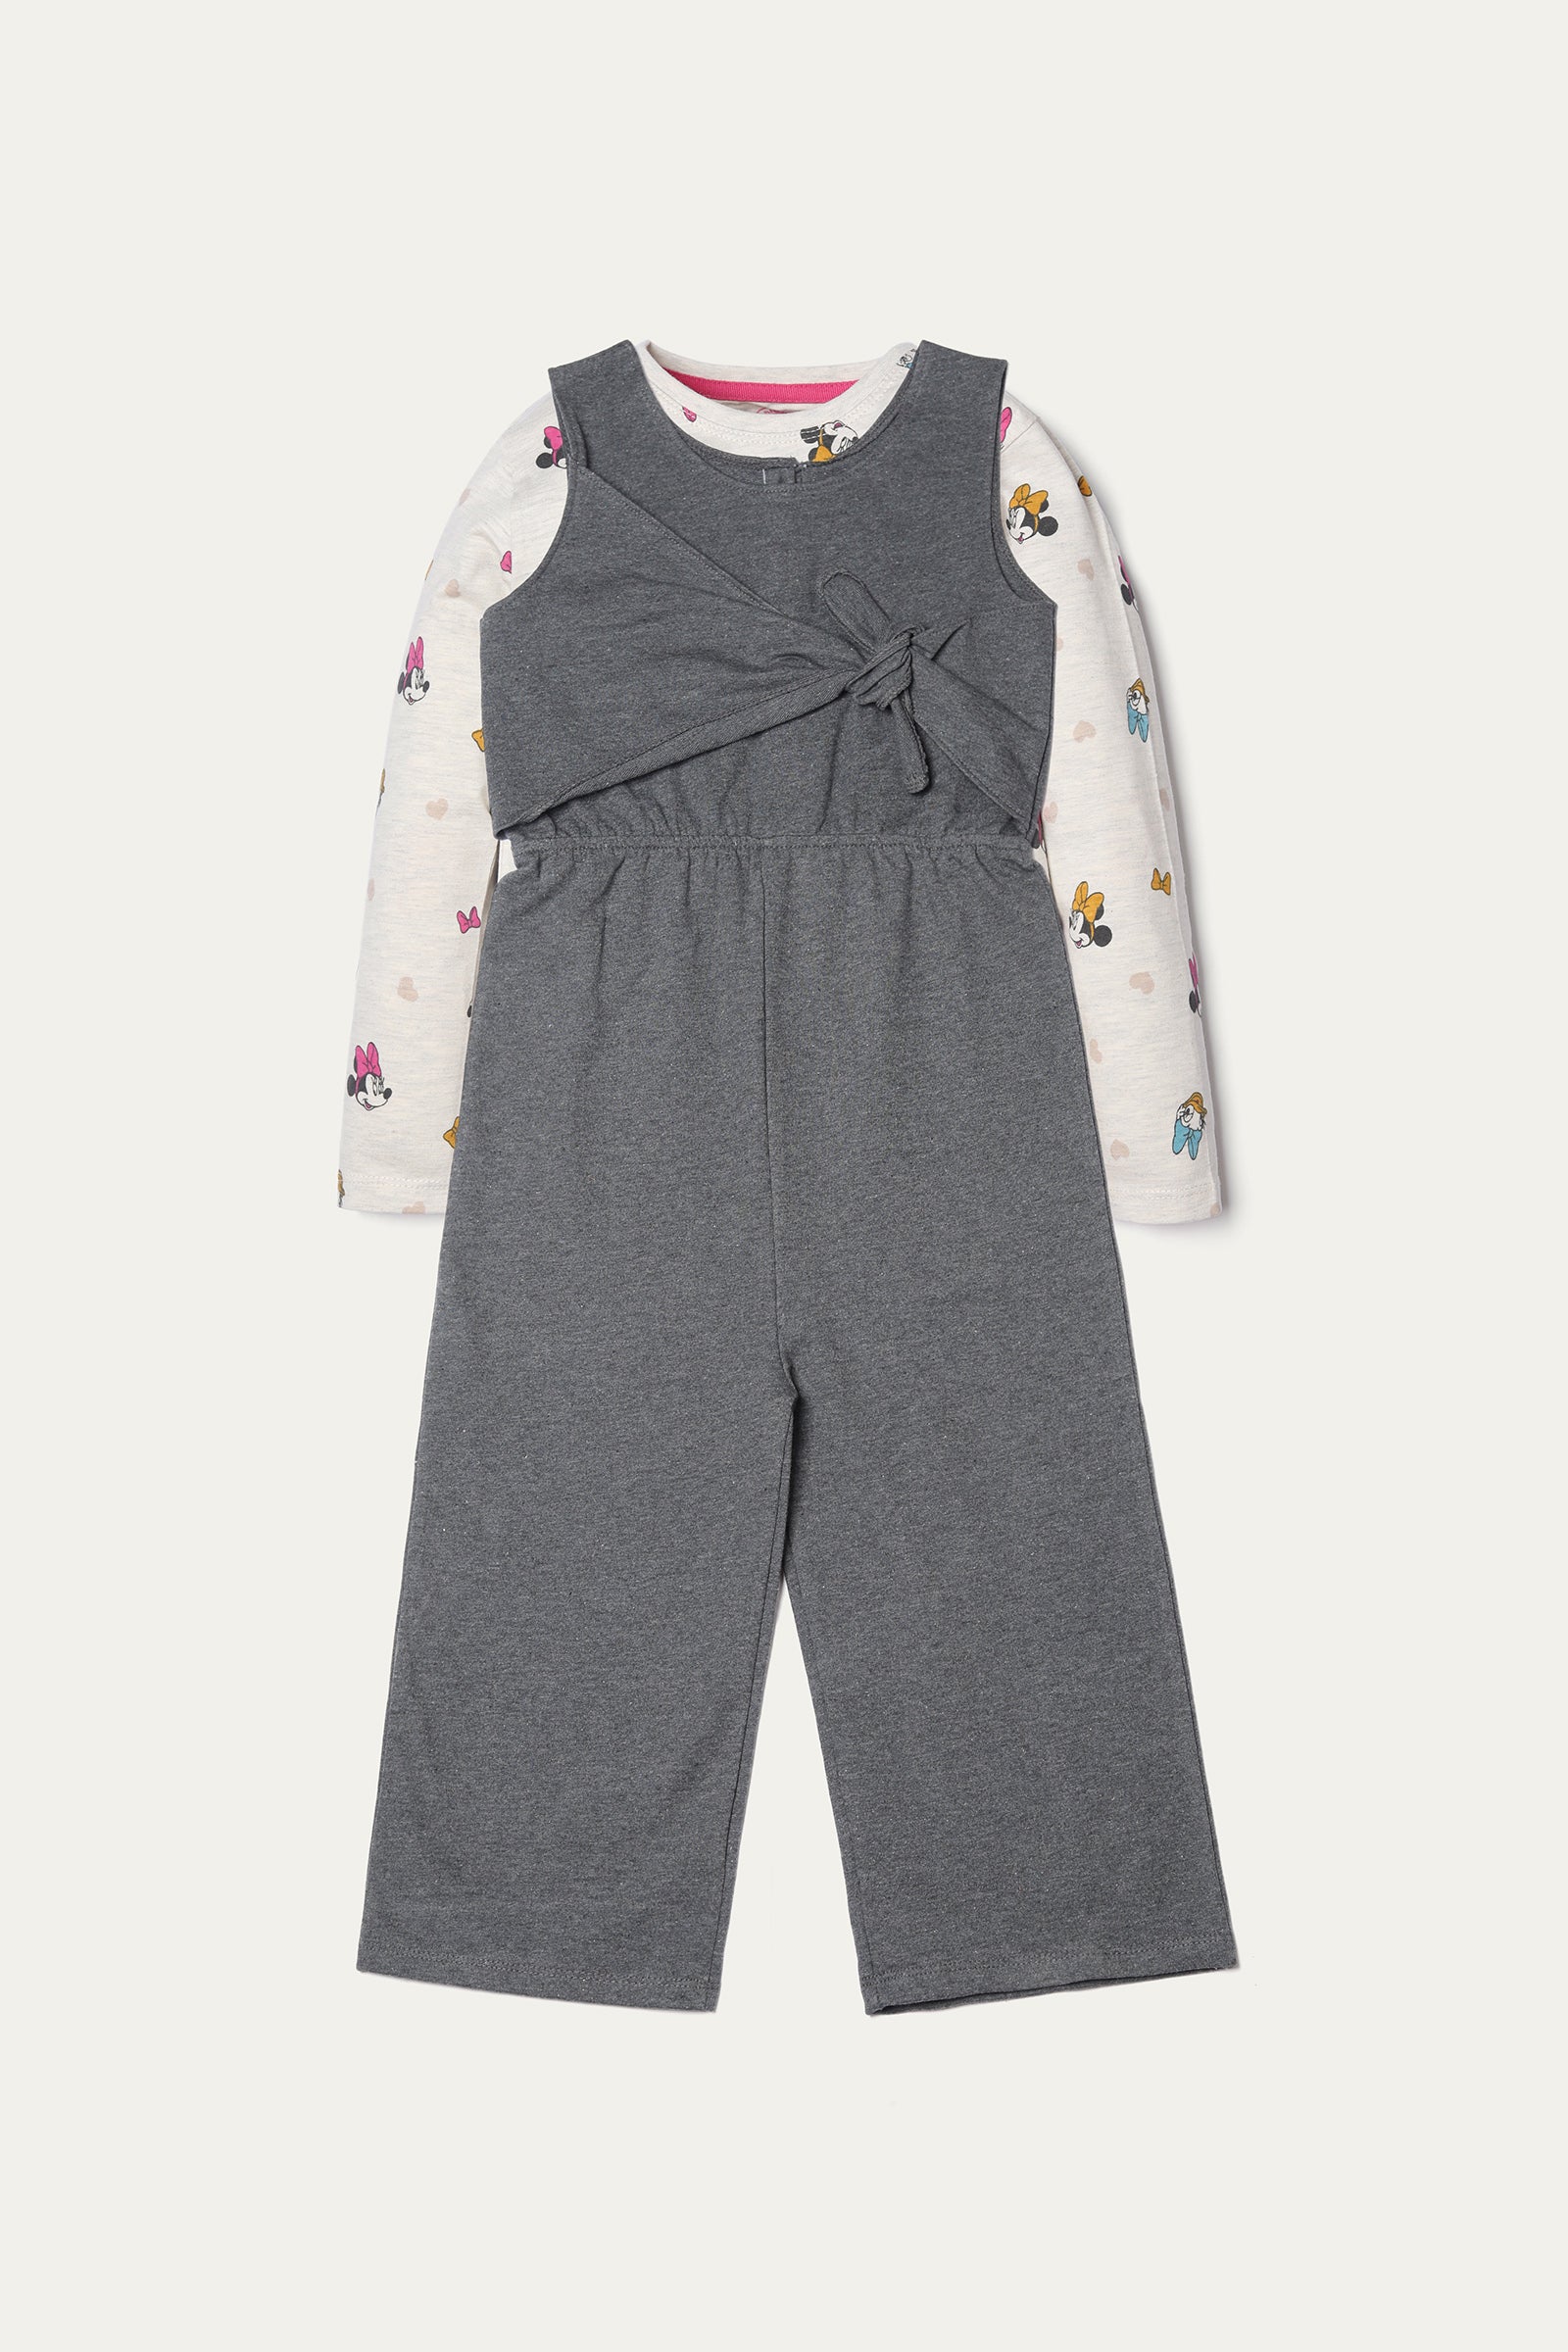 Jumpsuit - Soft Terry/Jersey | Assorted - Best Kids Clothing Brands In Pakistan Online|Minnie Minors